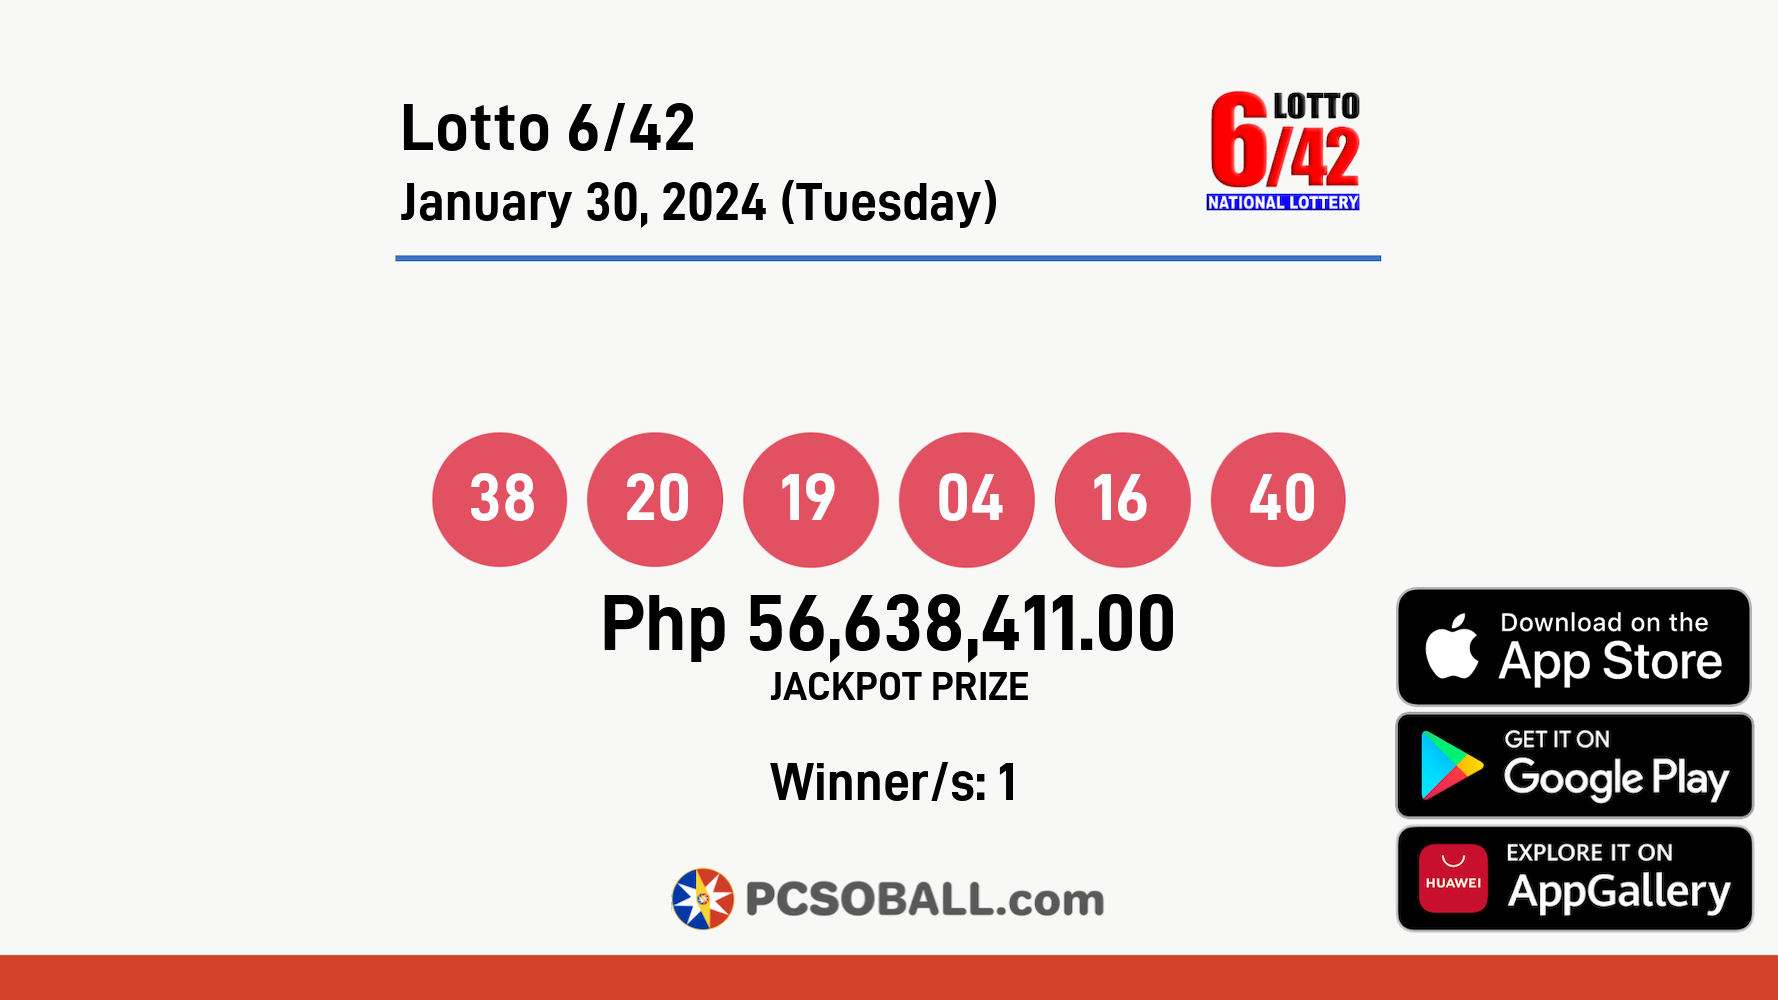 Lotto 6/42 January 30, 2024 (Tuesday) Result